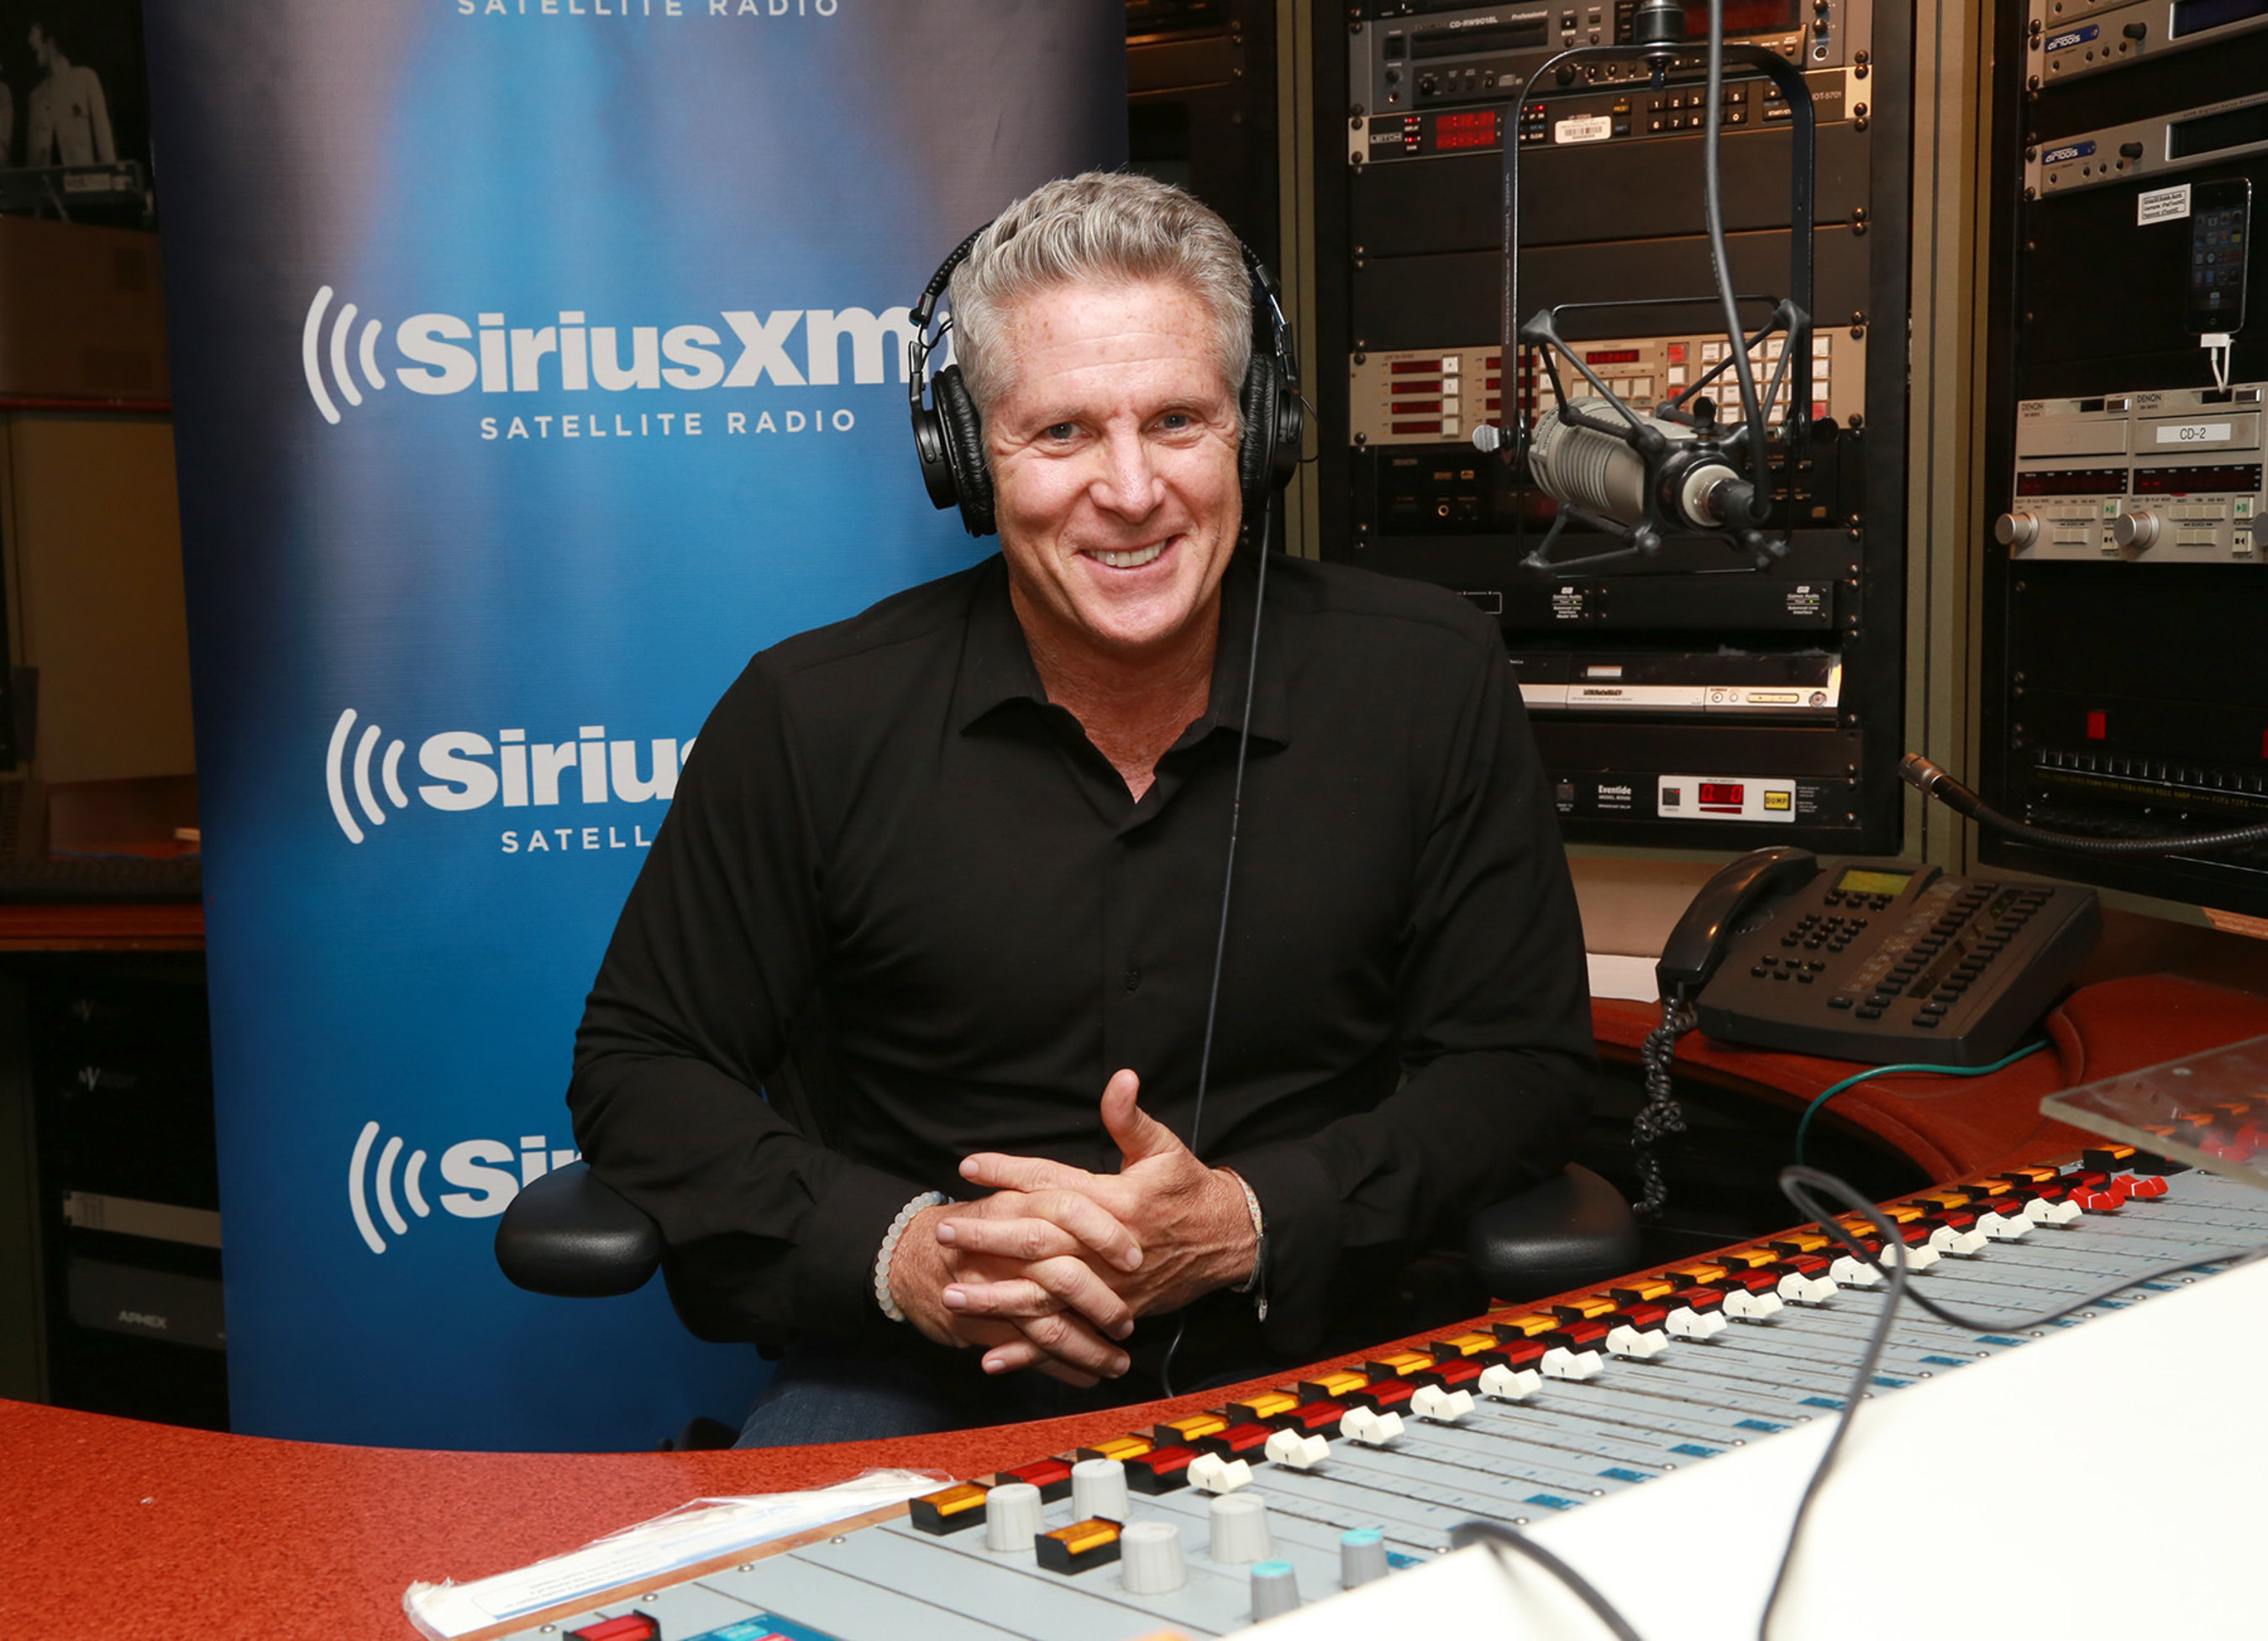 Donny Deutsch to Host Live Call-In Show Exclusively on SiriusXM